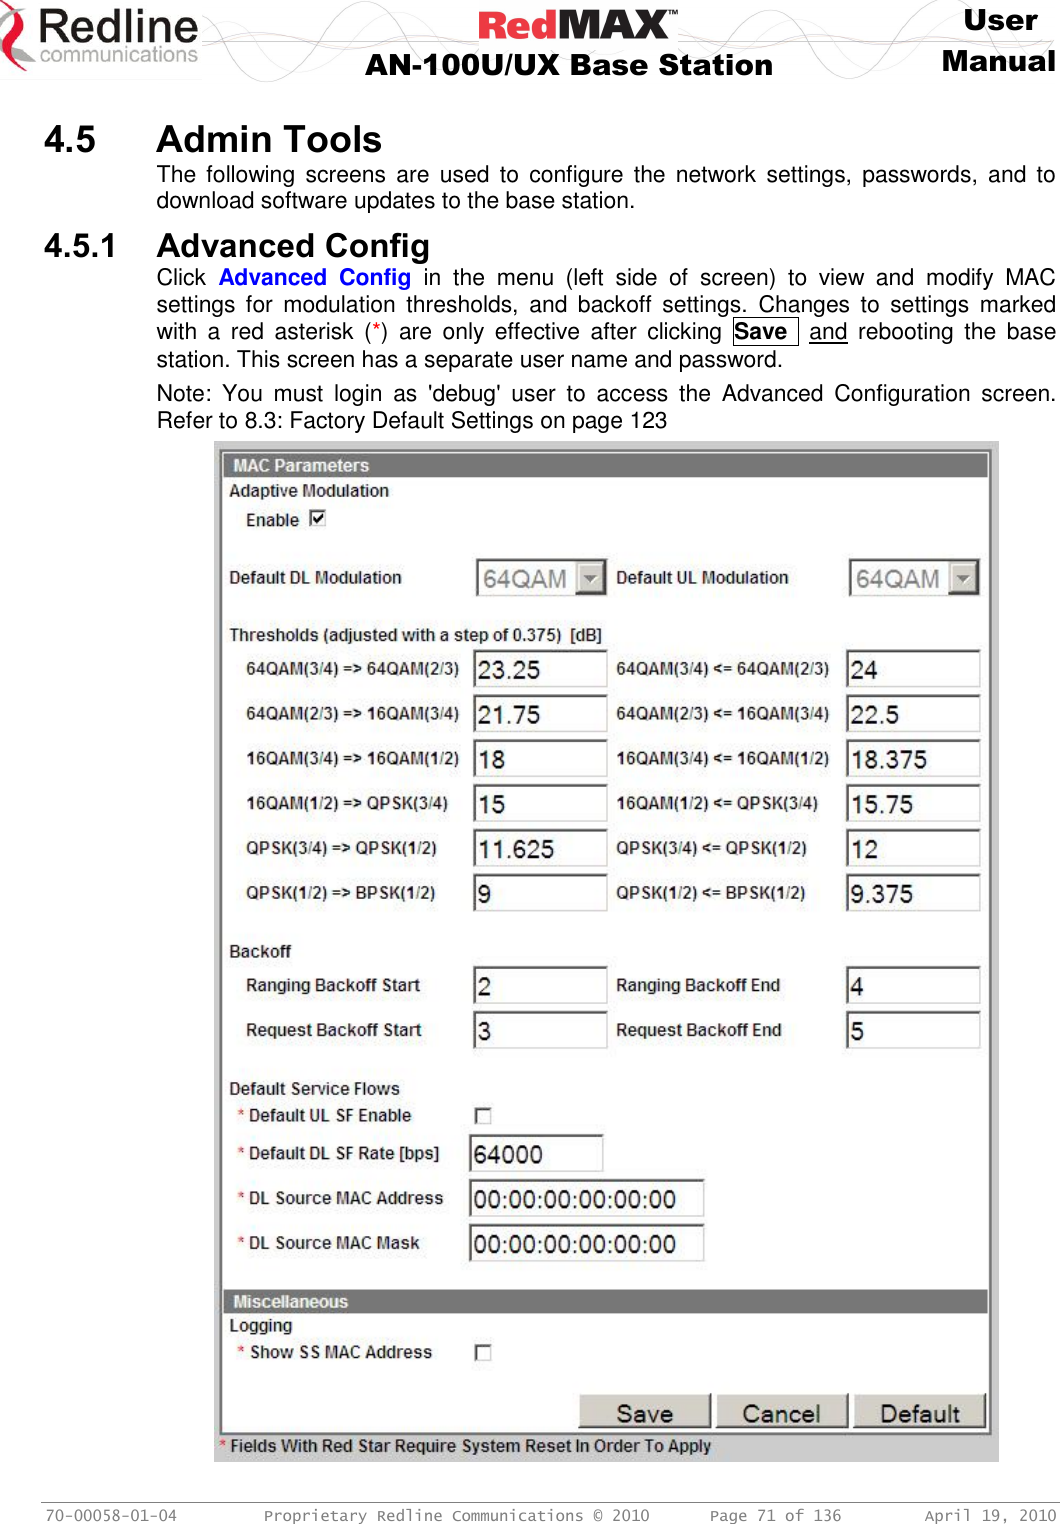     User  AN-100U/UX Base Station Manual   70-00058-01-04  Proprietary Redline Communications © 2010   Page 71 of 136  April 19, 2010  4.5 Admin Tools The  following  screens  are  used  to  configure  the  network  settings, passwords,  and  to download software updates to the base station. 4.5.1 Advanced Config Click  Advanced  Config  in  the  menu  (left  side  of  screen)  to  view  and  modify  MAC settings  for  modulation  thresholds,  and  backoff  settings.  Changes  to  settings  marked with  a  red  asterisk  (*)  are  only  effective  after  clicking  Save   and  rebooting  the  base station. This screen has a separate user name and password. Note:  You  must  login  as  &apos;debug&apos;  user  to  access  the  Advanced  Configuration  screen. Refer to 8.3: Factory Default Settings on page 123  